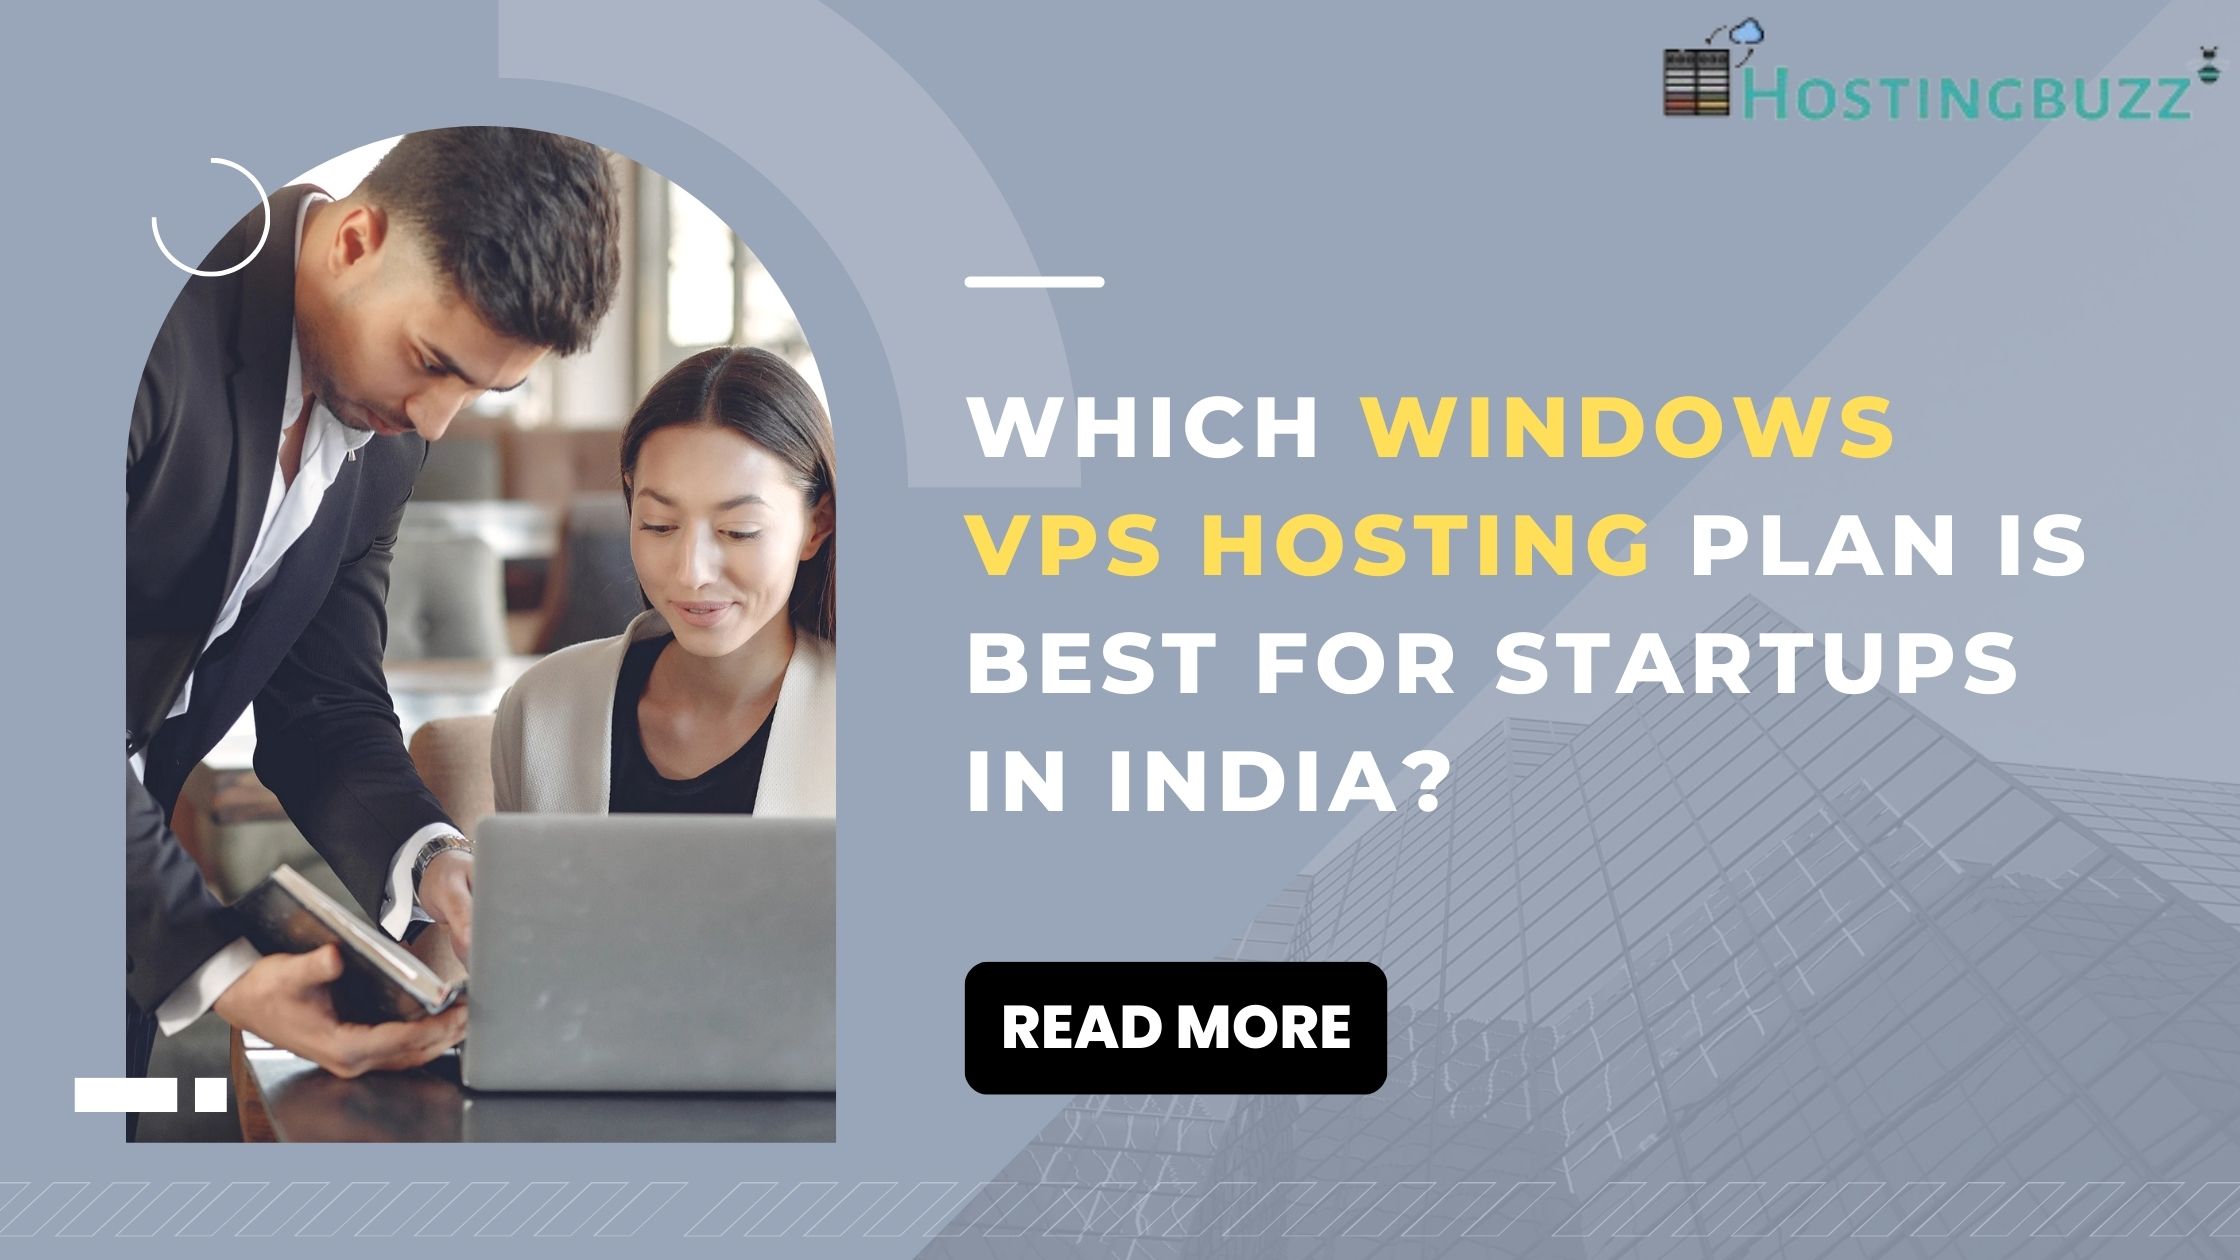 the right Windows VPS hosting plan is crucial for startups in India